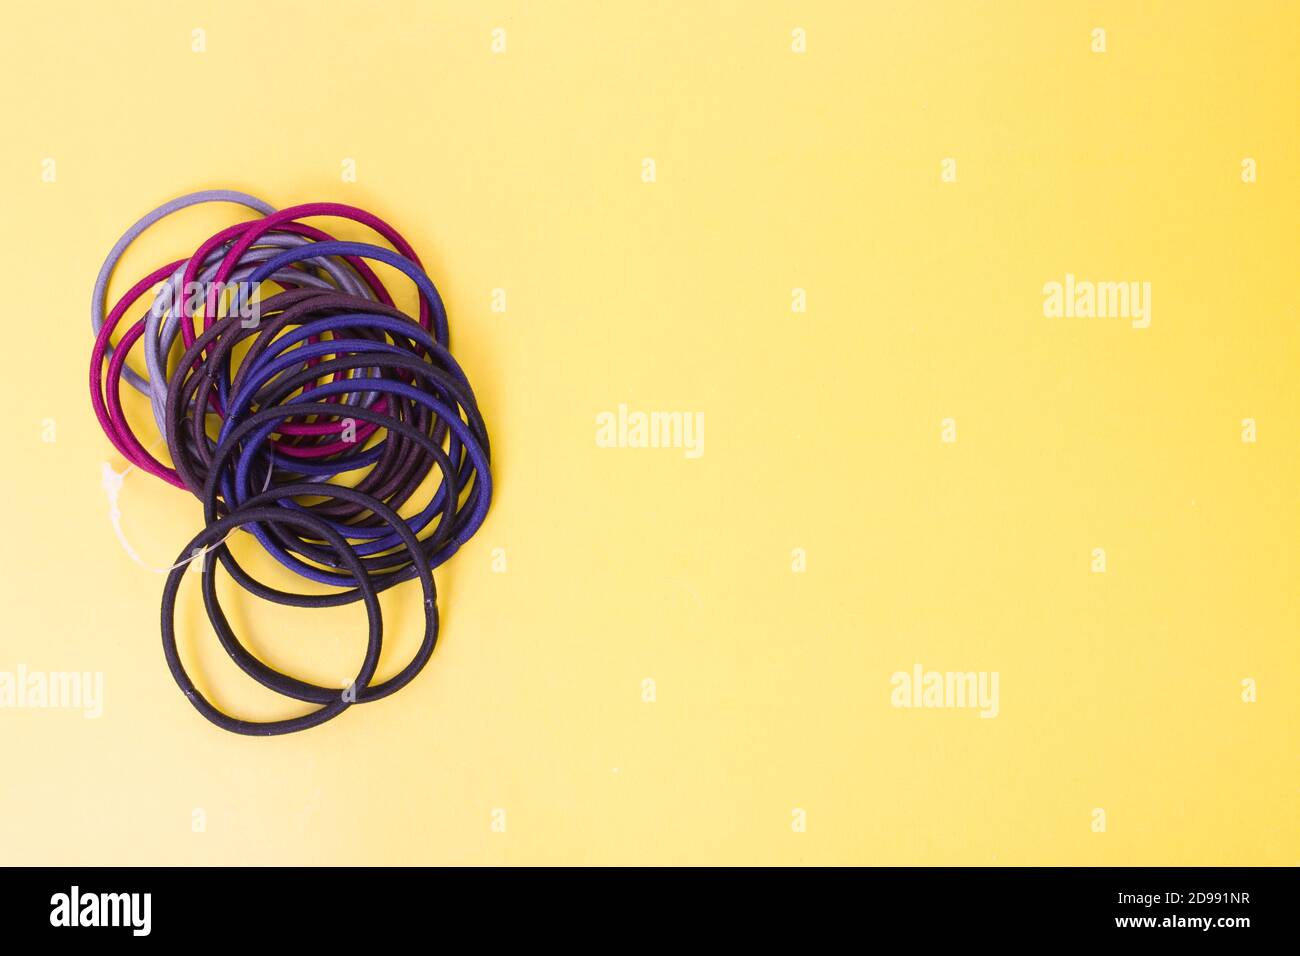 Pile of hair ties on yellow background Stock Photo